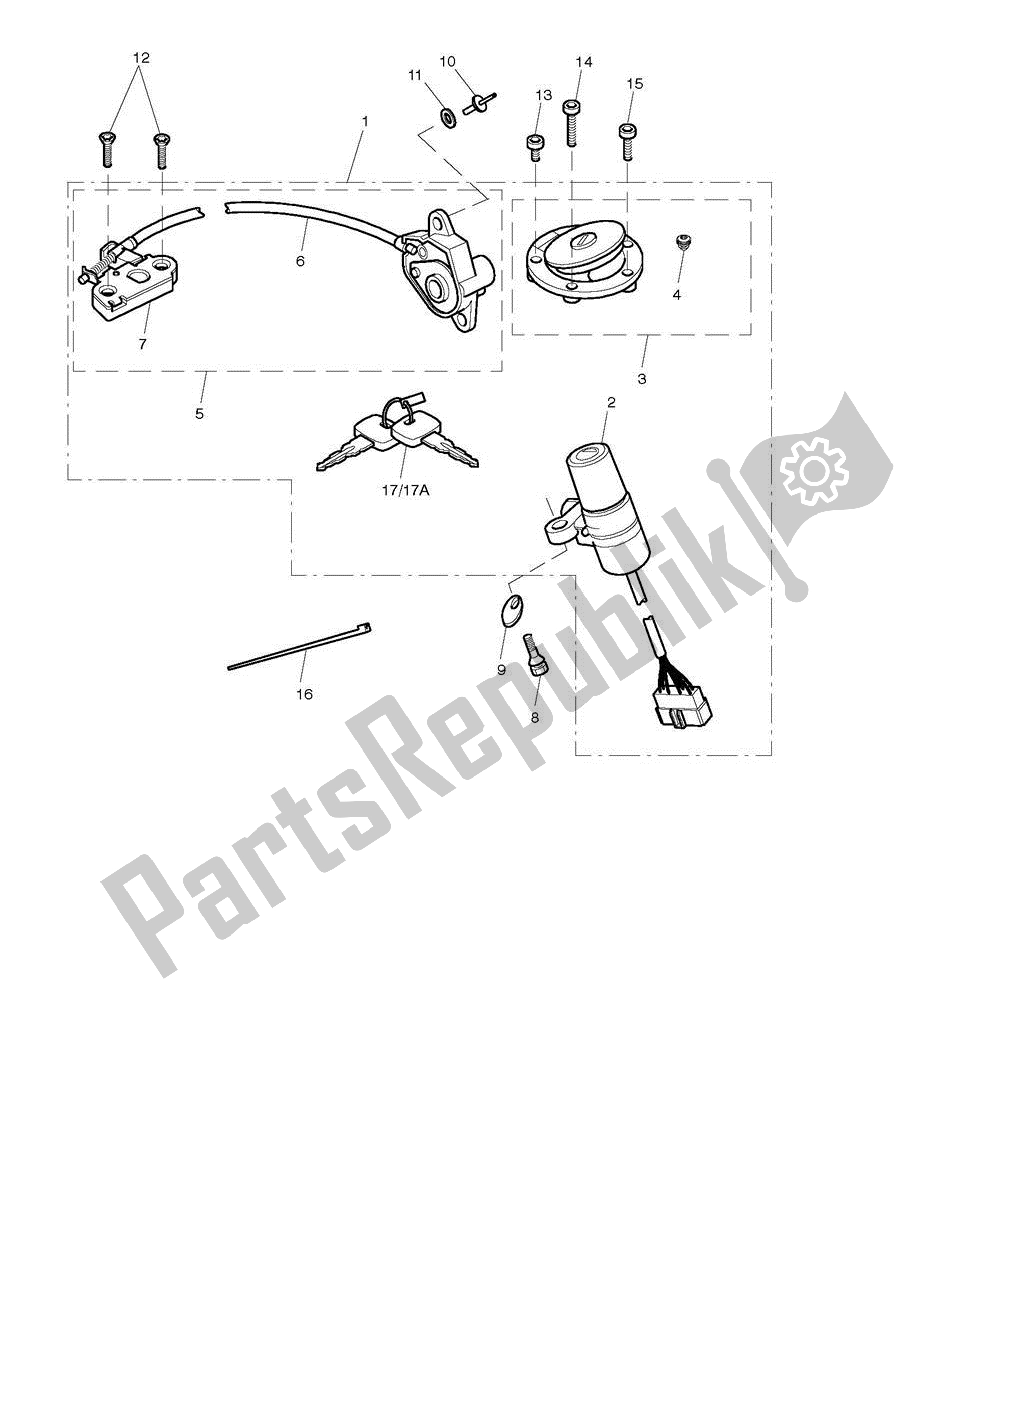 All parts for the Ignition Switch & Lock Set of the Triumph Street Triple 675 2008 - 2012